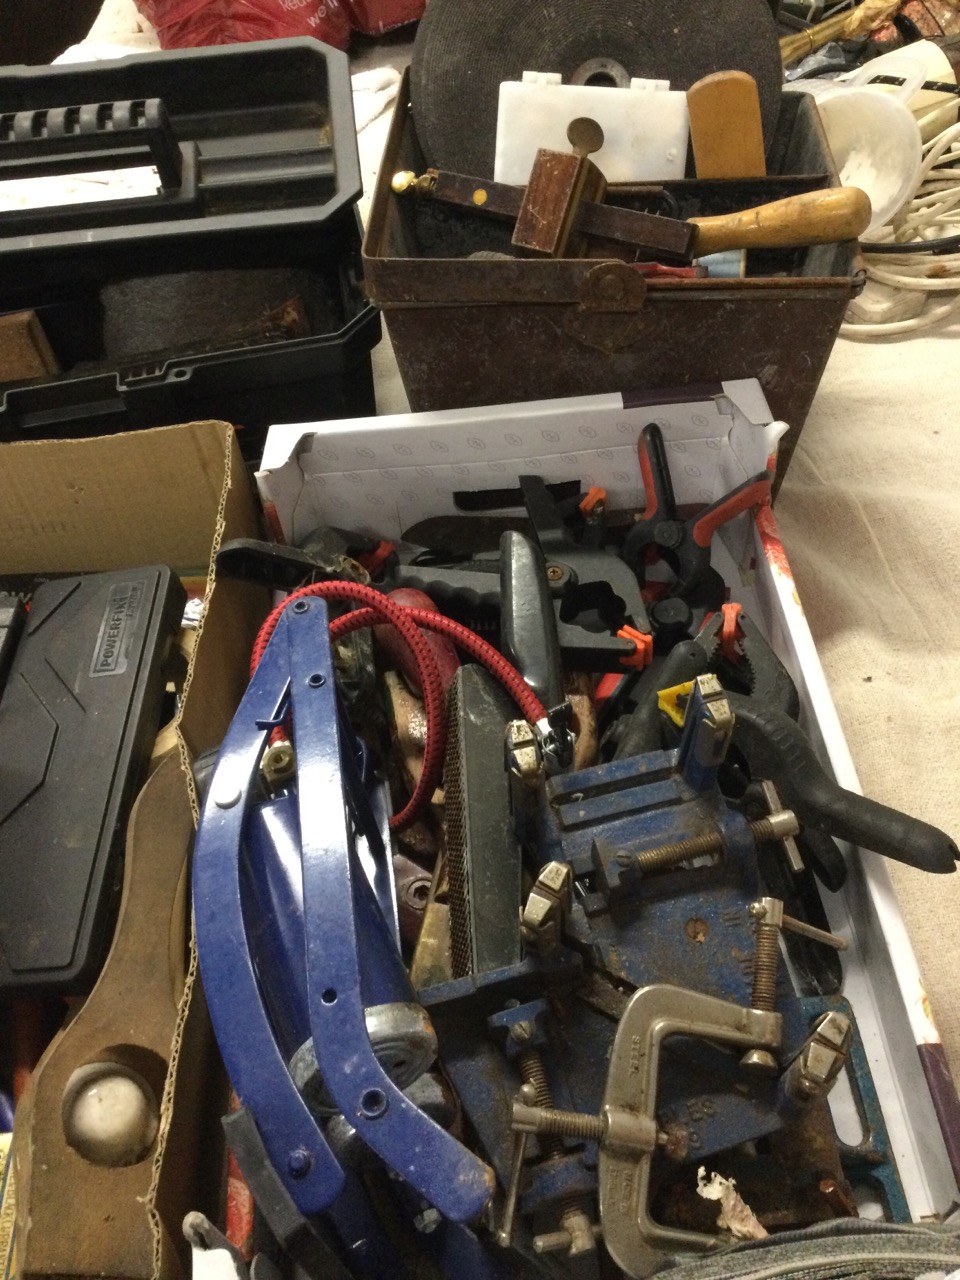 A concertina type toolbox full of miscellaneous tools - screwdrivers, tape, alun keys, pliers, drill - Image 2 of 3